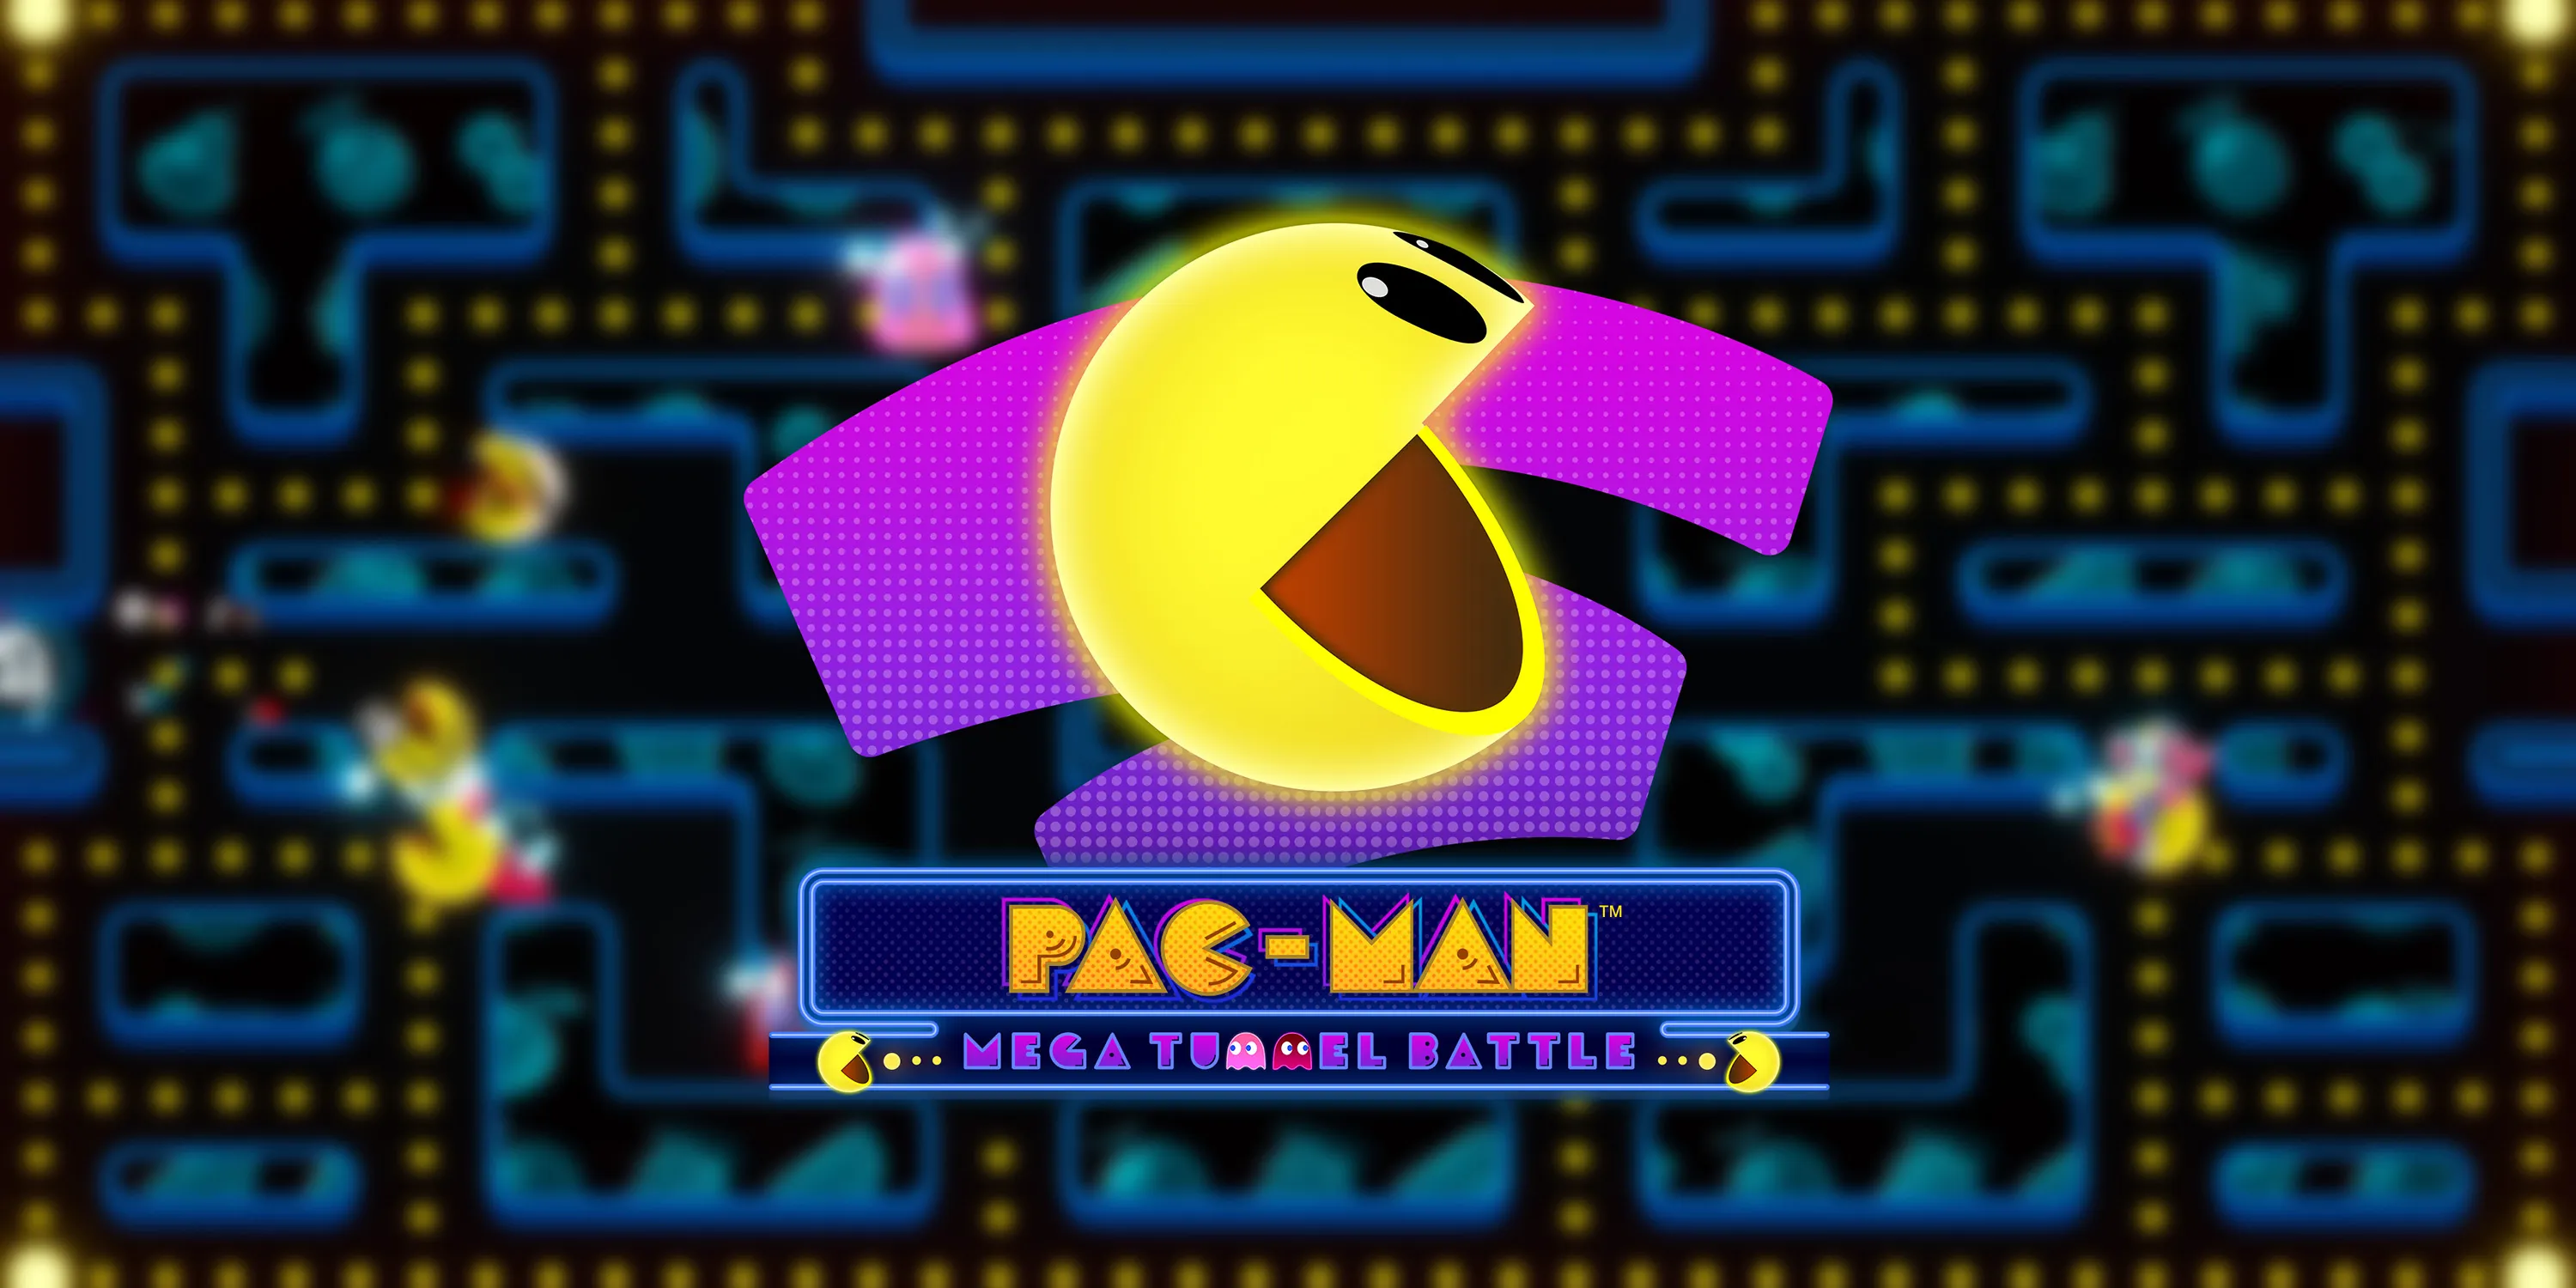 Vibrant PAC-MAN graphic from 'Mega Tunnel Battle' set against a classic maze background.